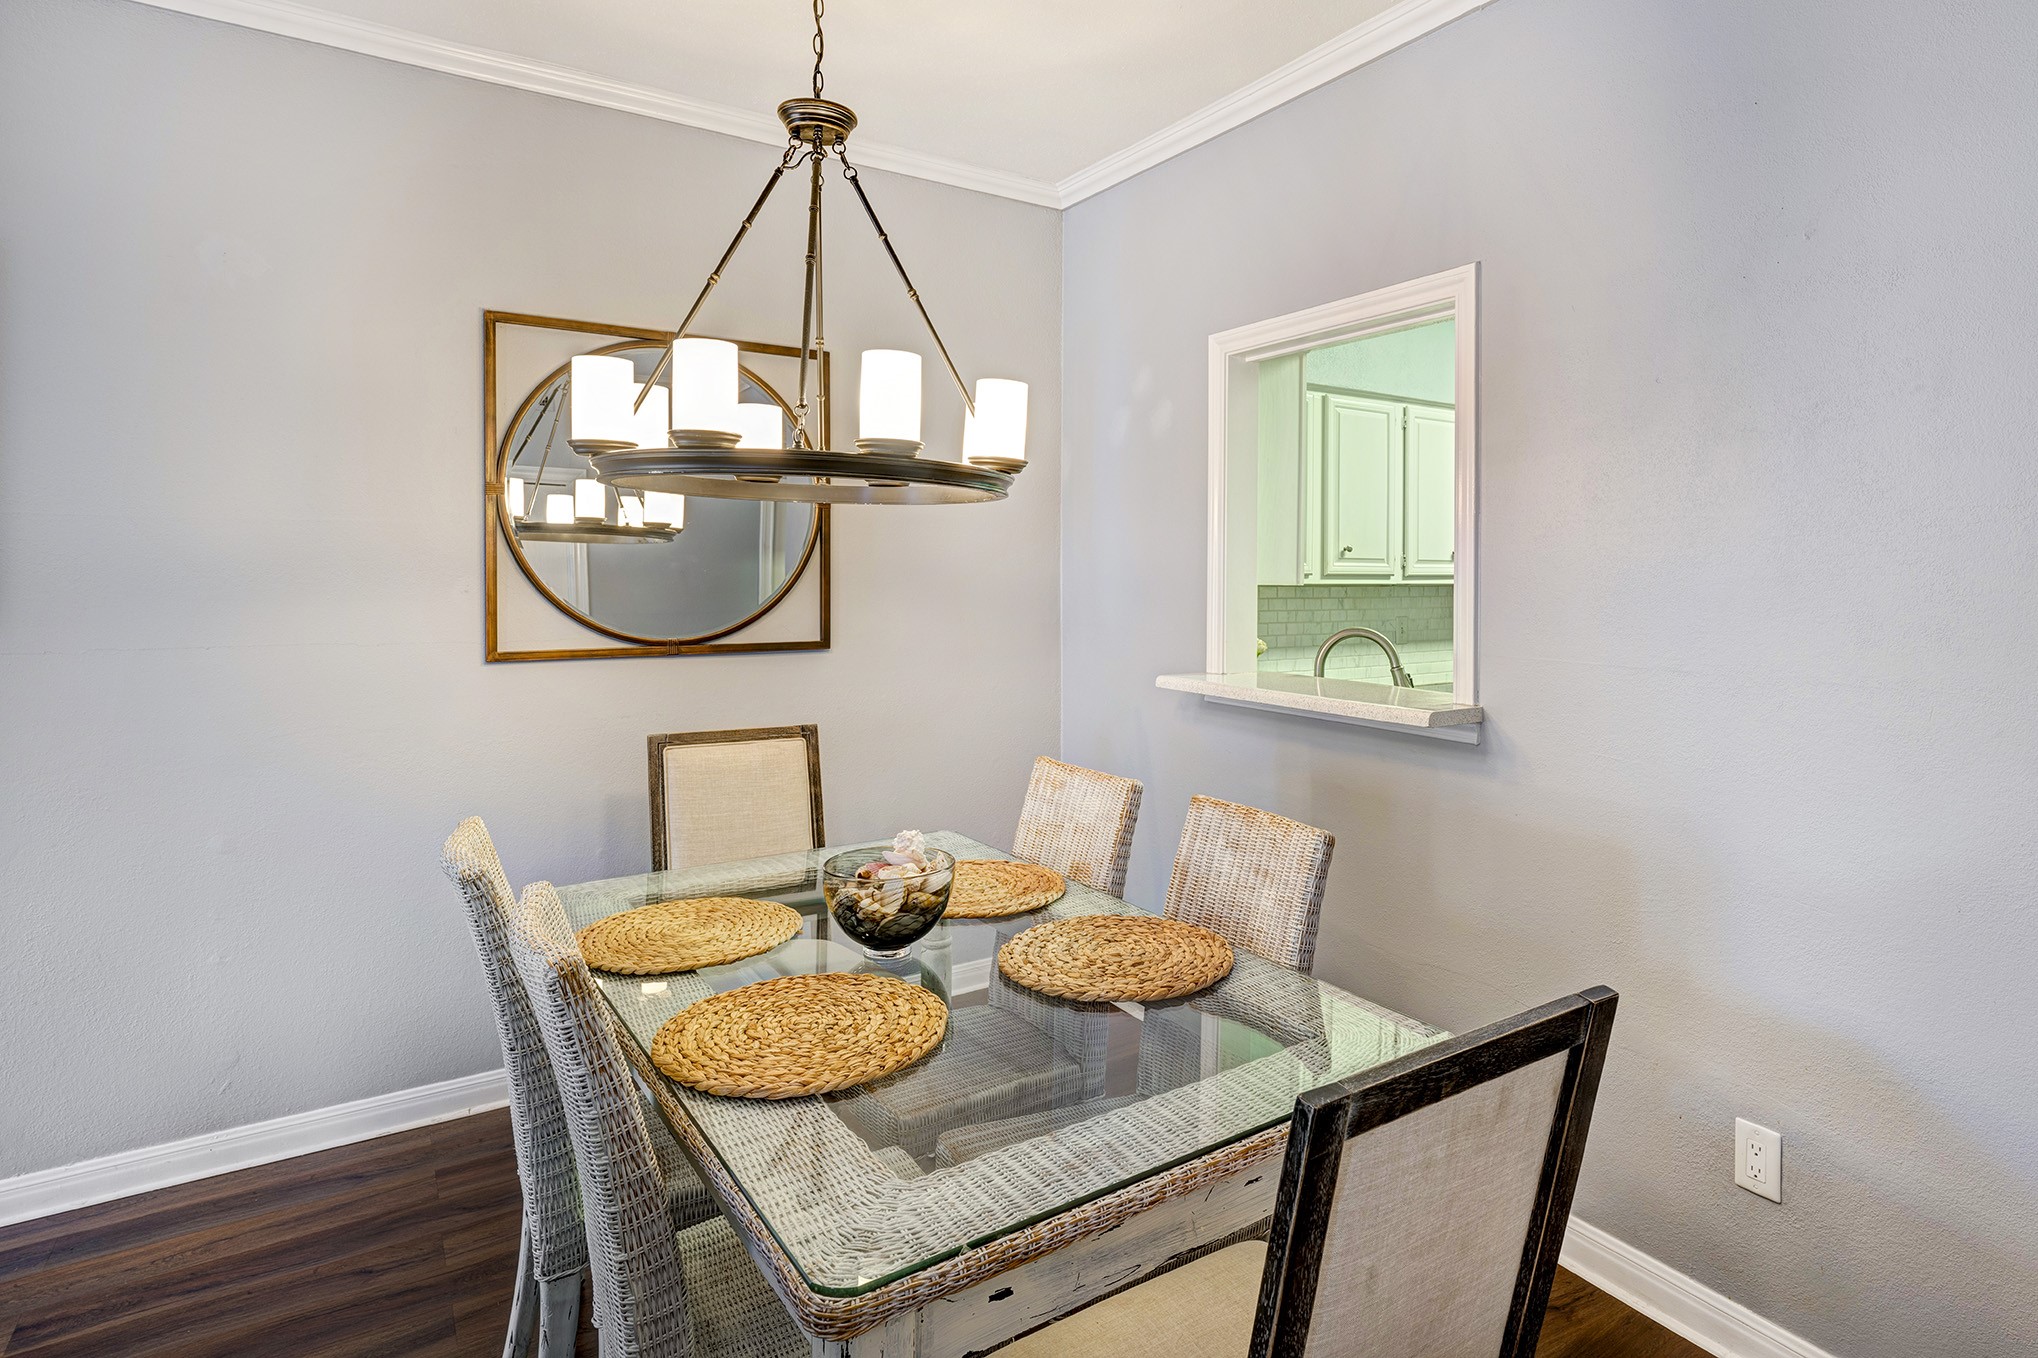 One's gaze falls upon the charming dining area that offers a glimpse into the adjoining kitchen, while the capacious family room, although not captured in the photograph, is also present.